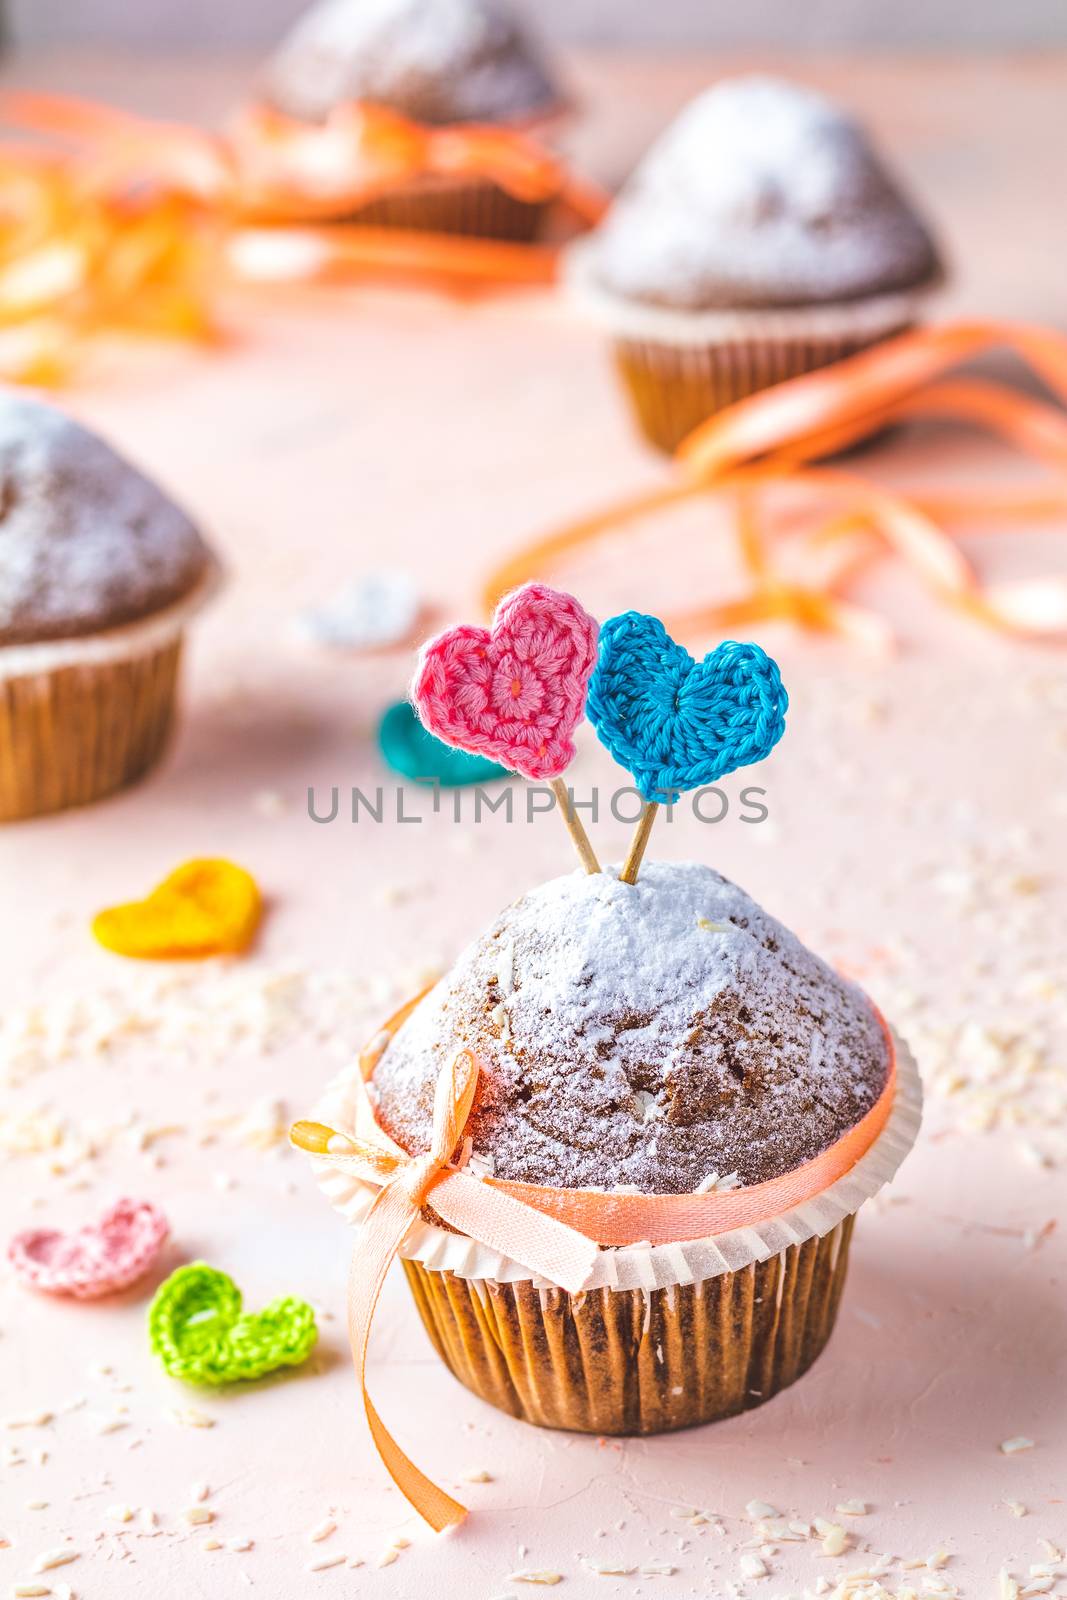 Tasty delicious homemade muffin on light pink living coral stone concrete surface with knitting hearts, copy space. Sweet food for valentines day.